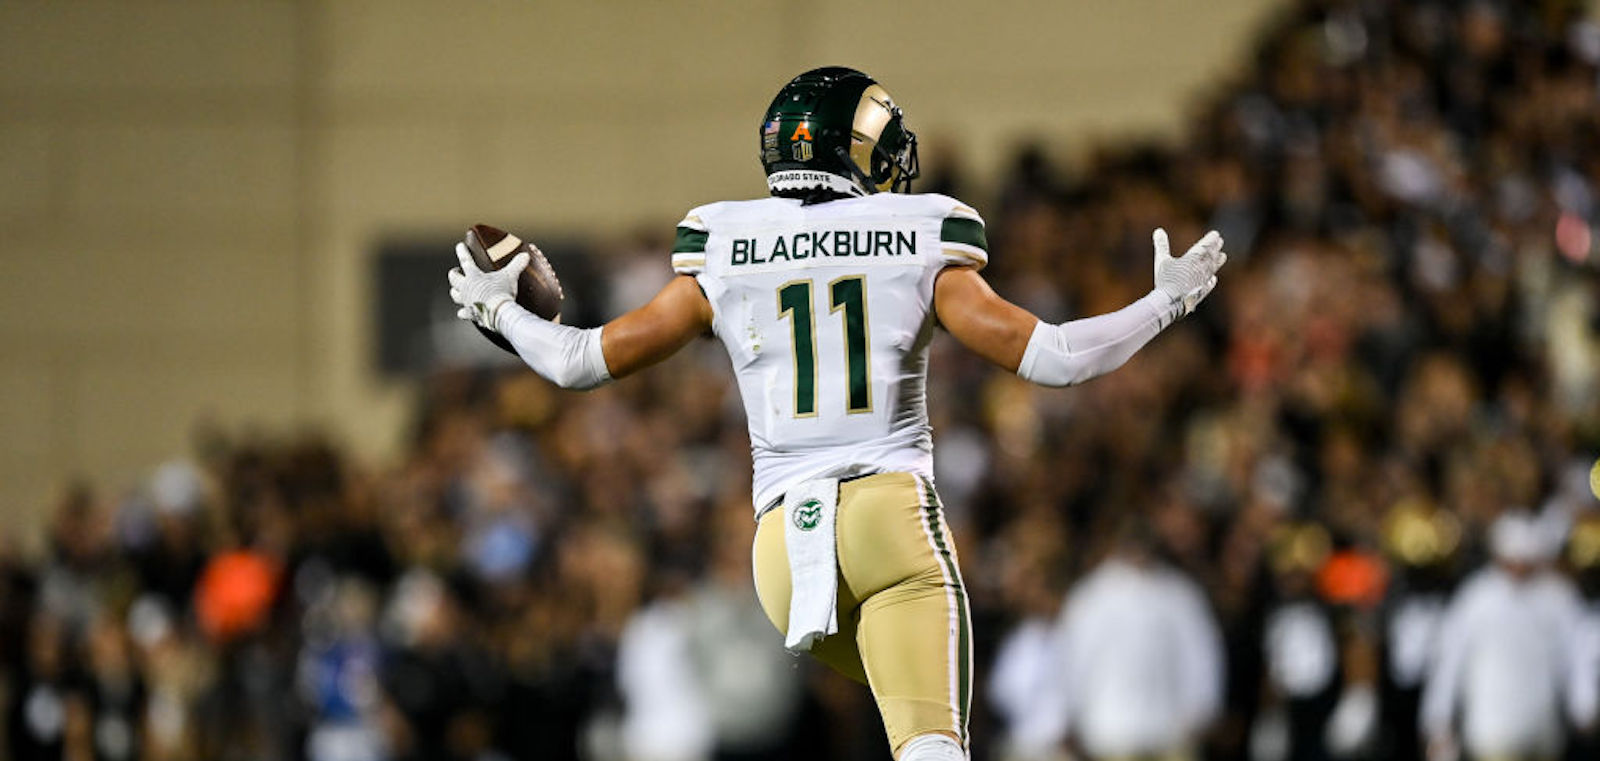 Defensive back Henry Blackburn #11 of the Colorado State Rams celebrates after a first quarter interception against the Colorado Buffaloes at Folsom Field on September 16, 2023 in Boulder, Colorado.